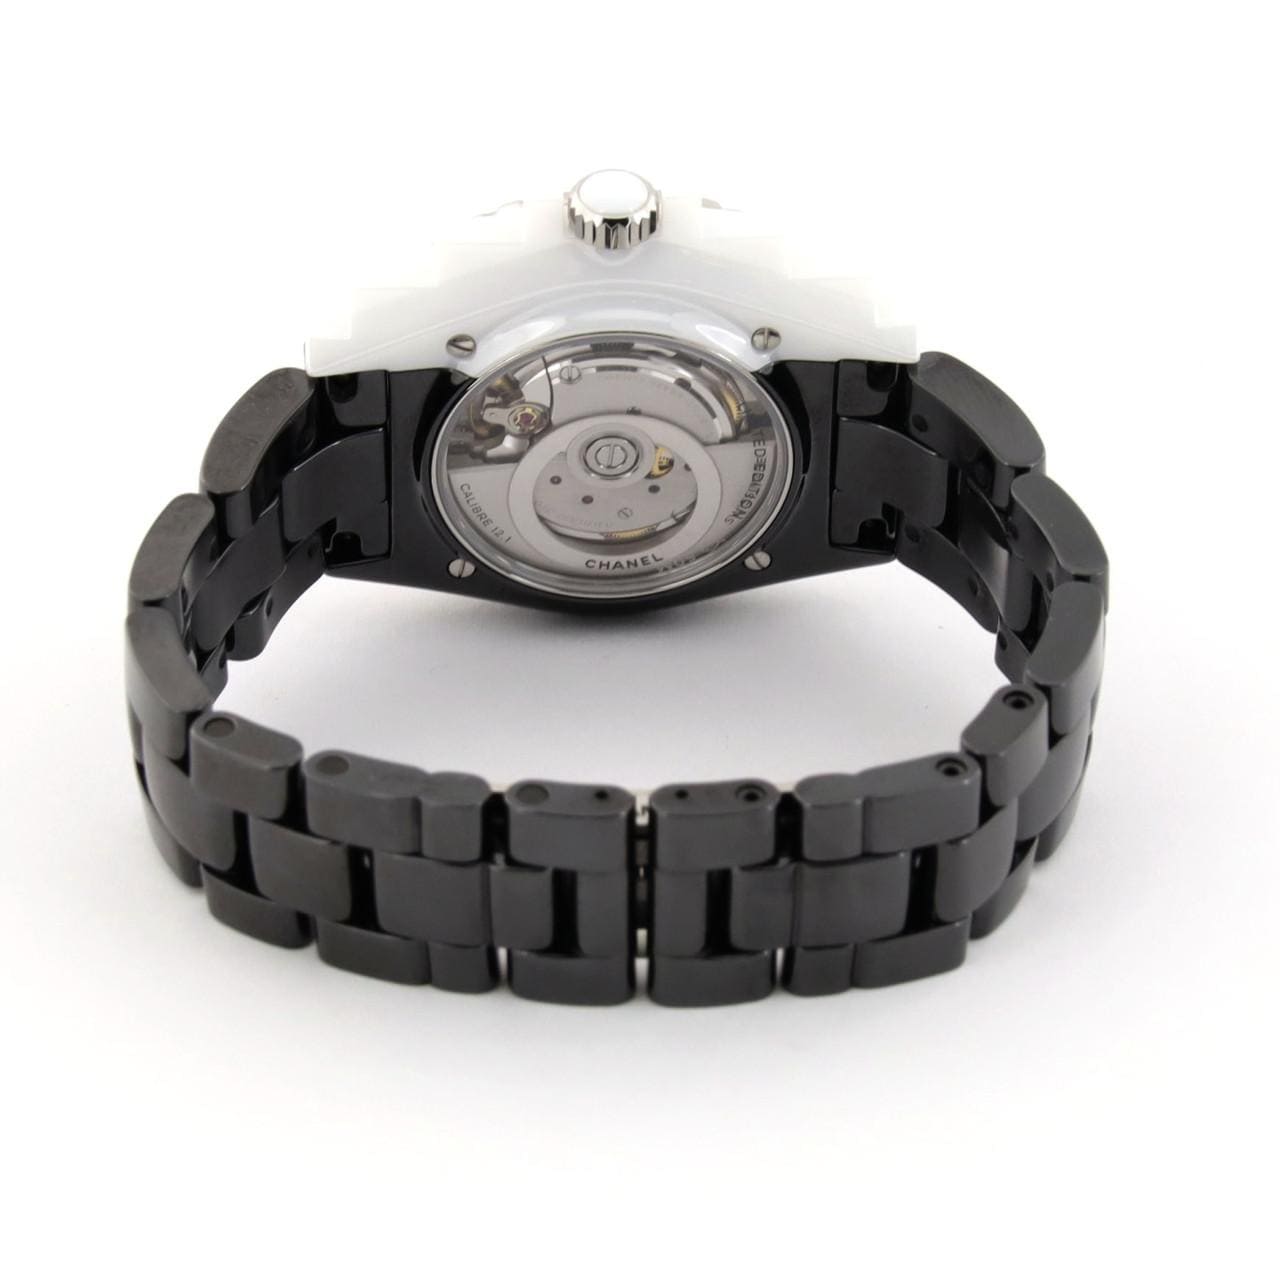 CHANEL J12 CYBERNETIC LIMITED H7988 陶瓷自动上弦